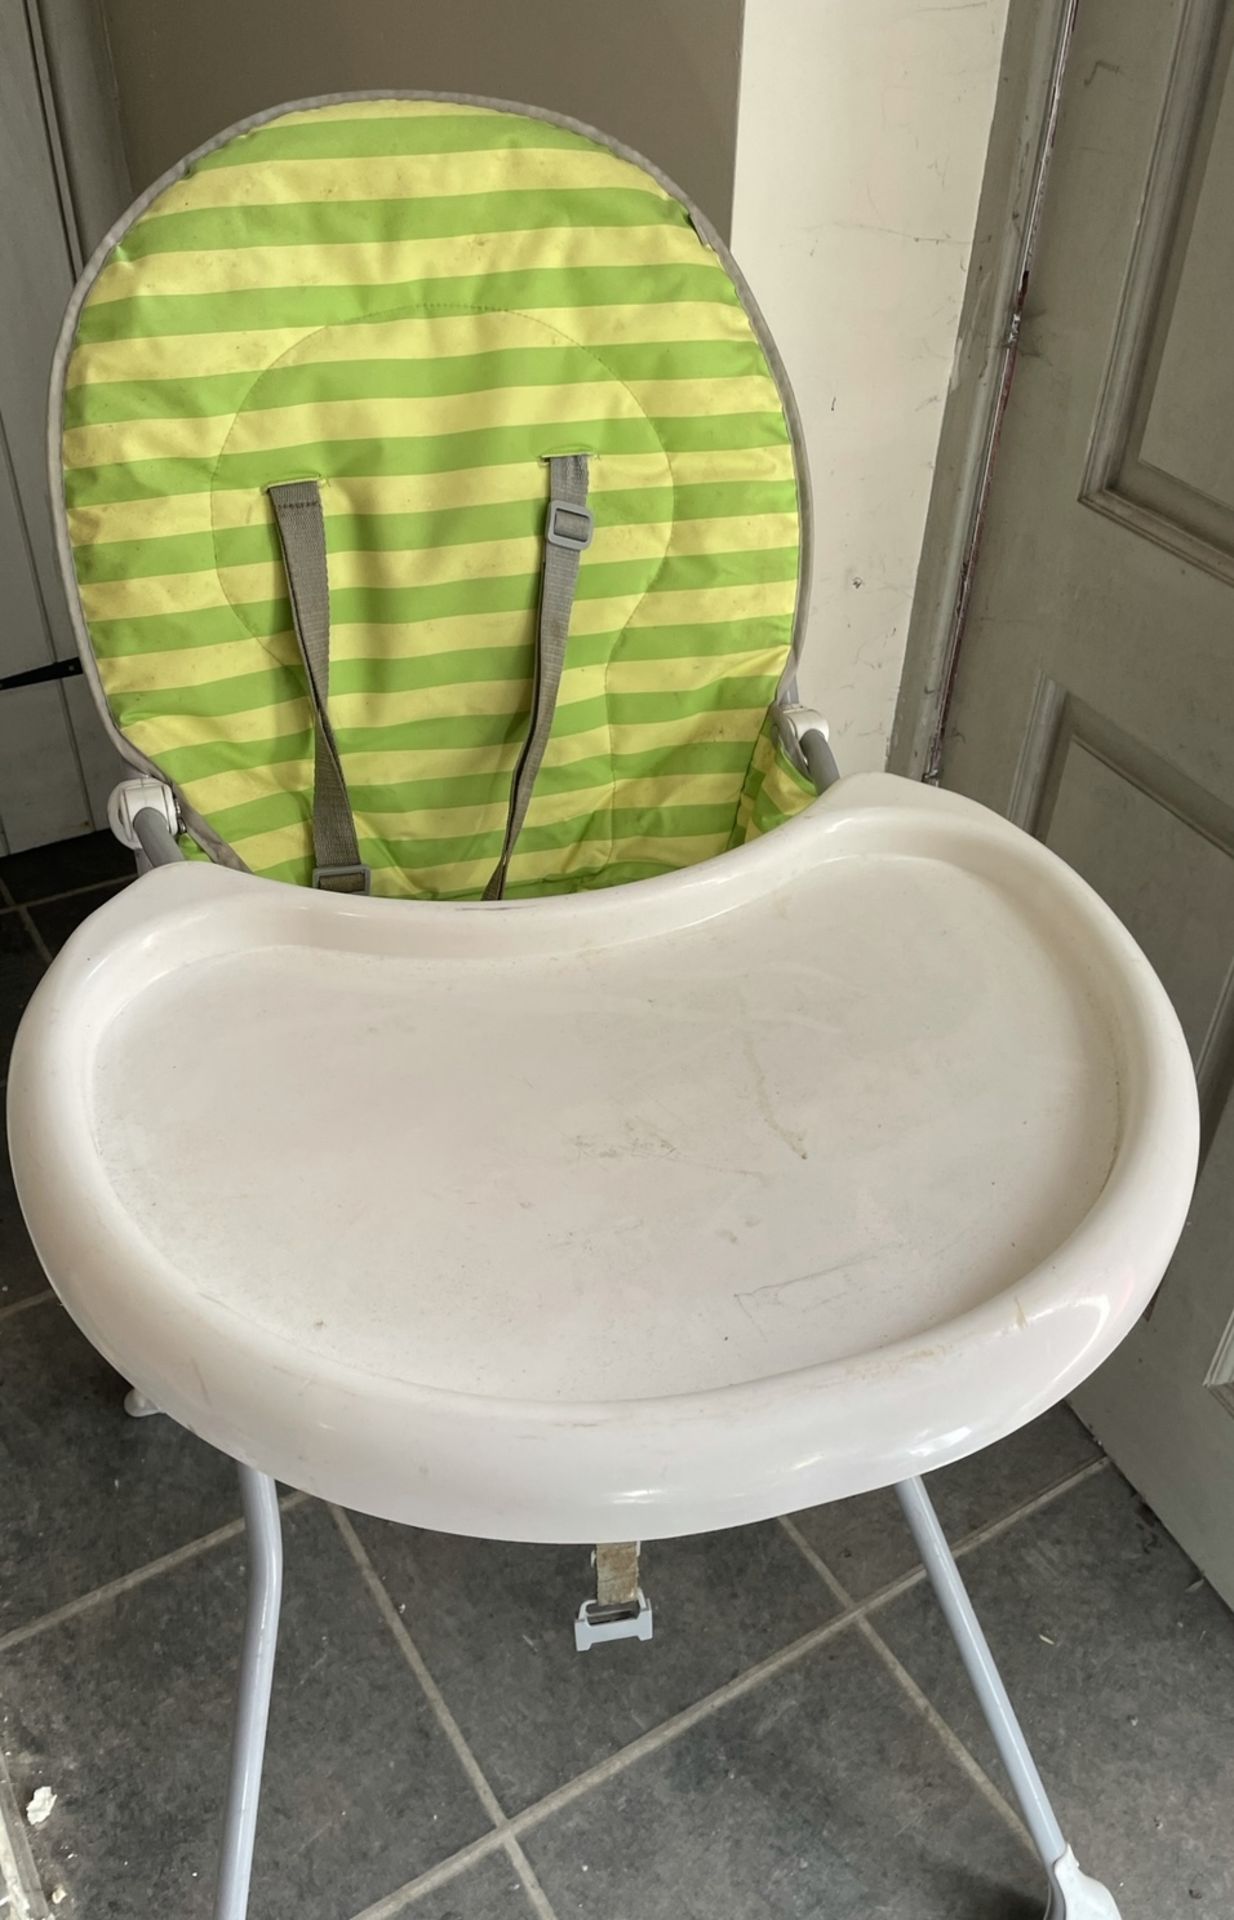 Baby High Chair - Image 2 of 2